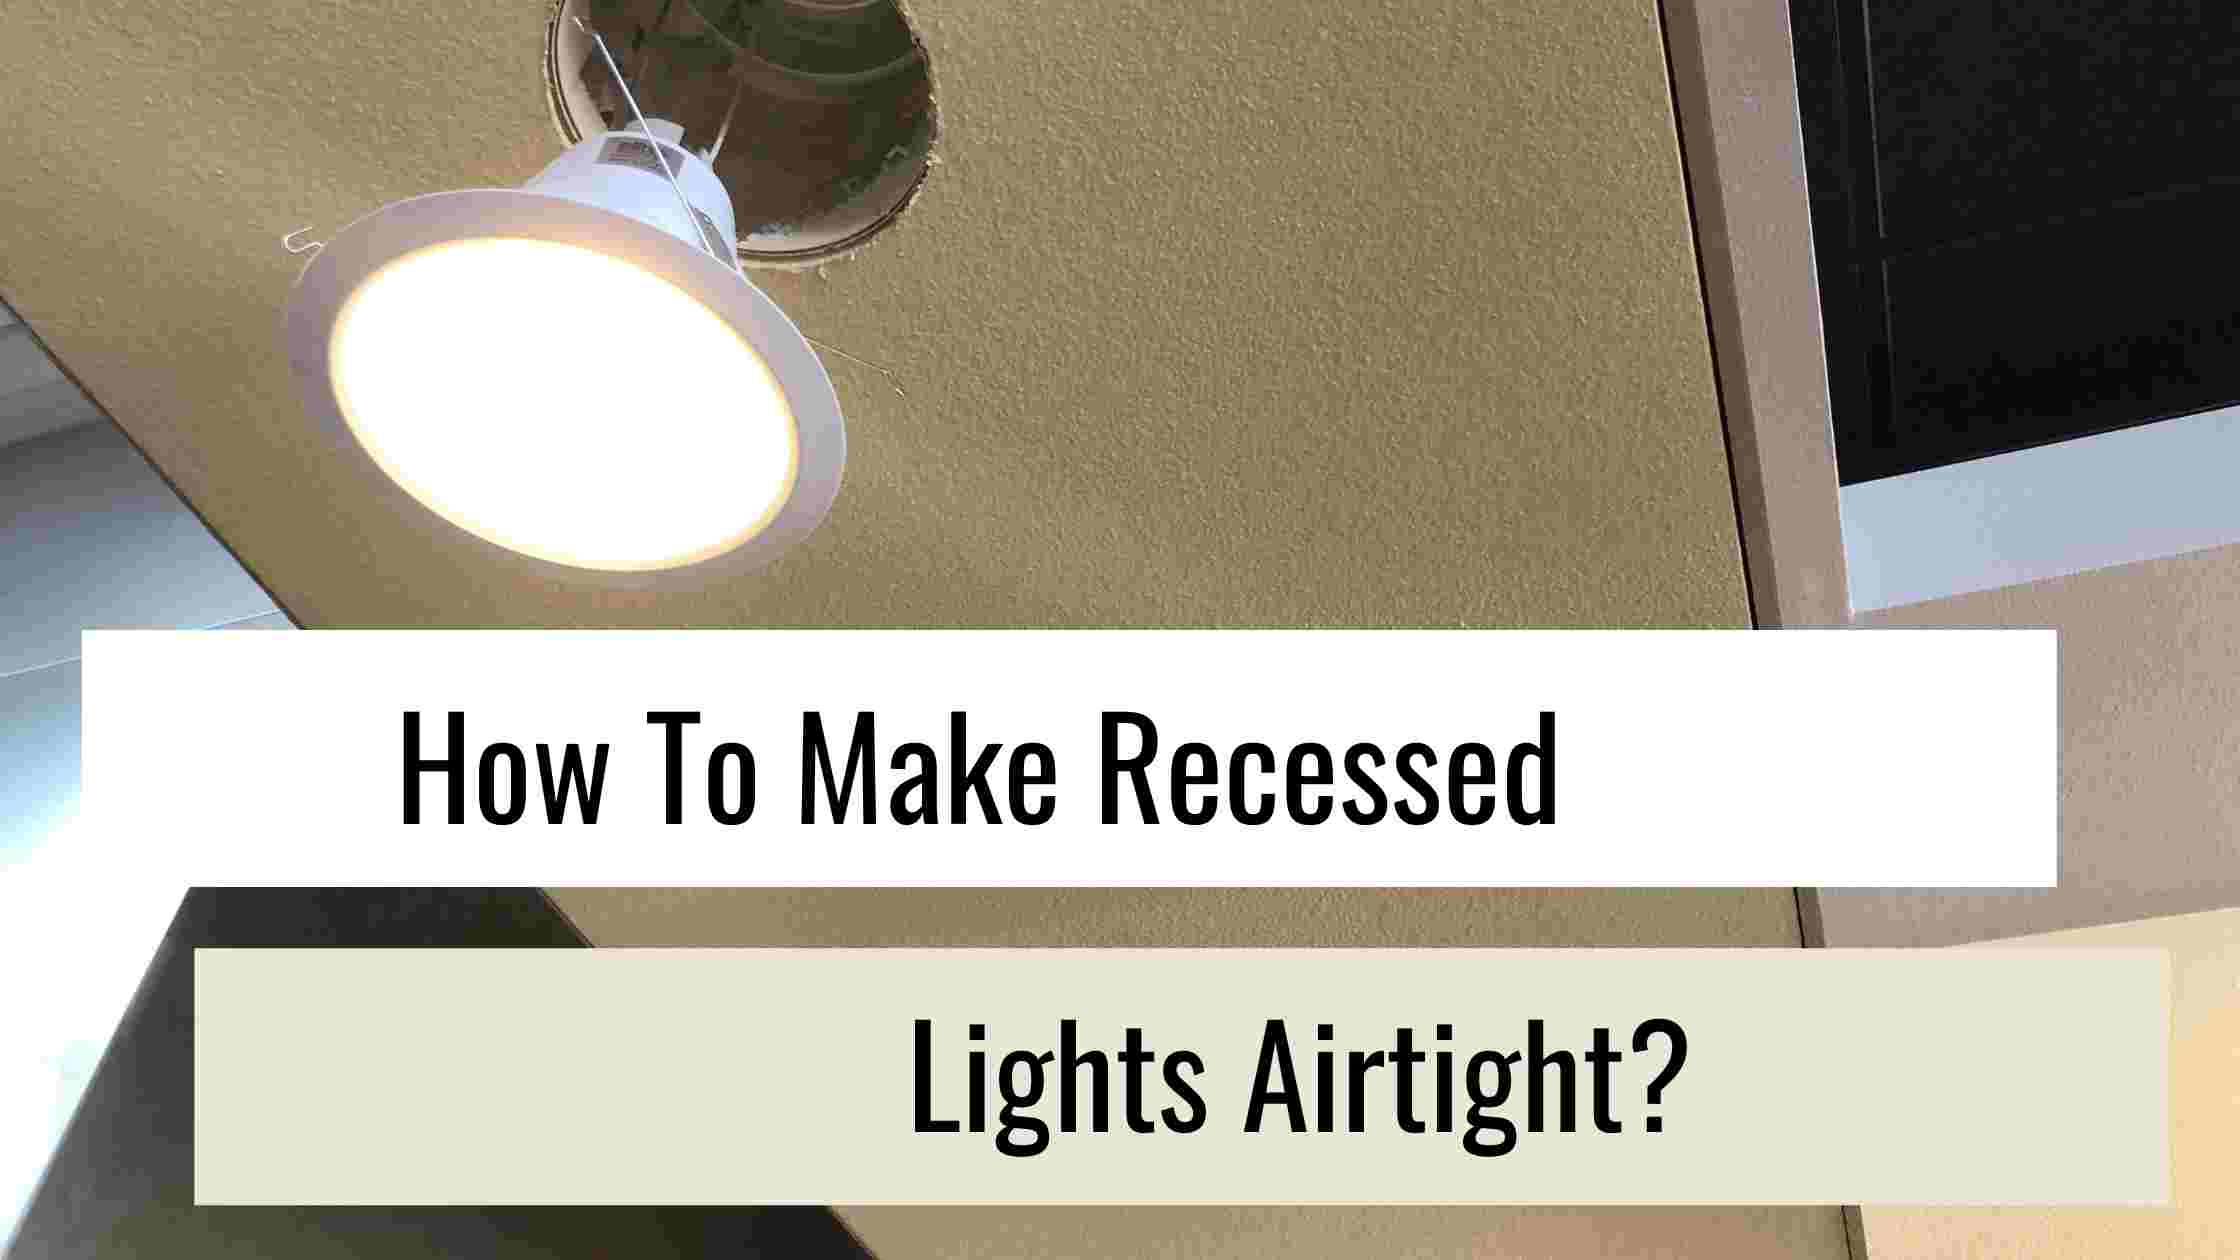 How To Make Recessed Lights Airtight, How To Seal Up Recessed Lighting